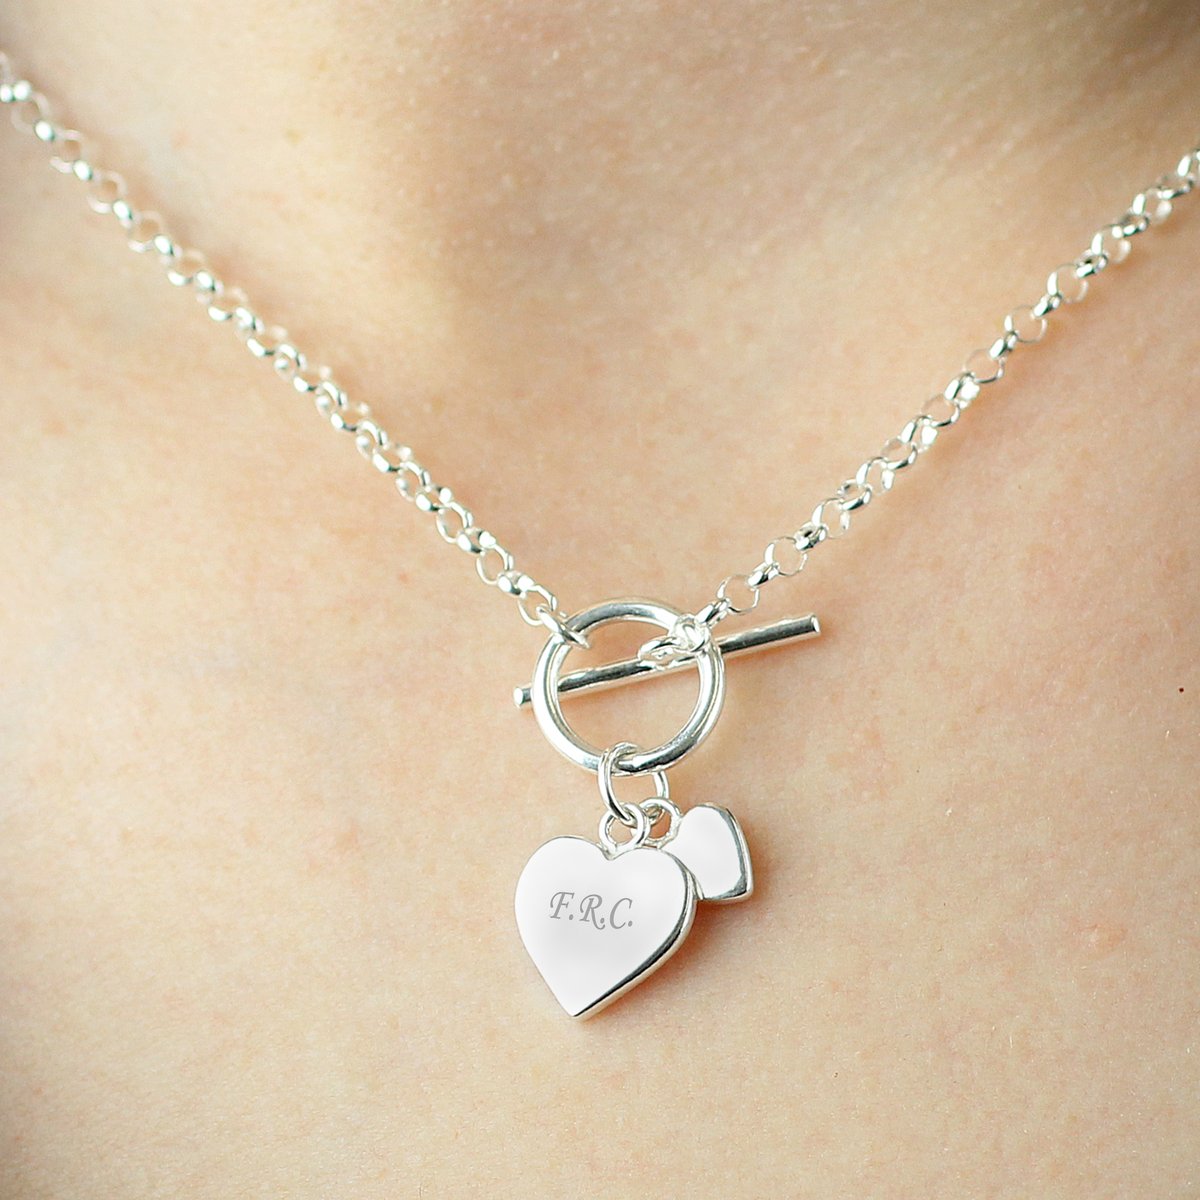 This delicate, sterling silver necklace measures 41cm in length and will be personalised with up to 3 initials on one of the two heart pendants. A great gift for anyone special lilyblueuk.co.uk/personalised-h…

#jewellery #silverjewellery #necklace #giftideas #MHHSBD #shopindie #EarlyBiz